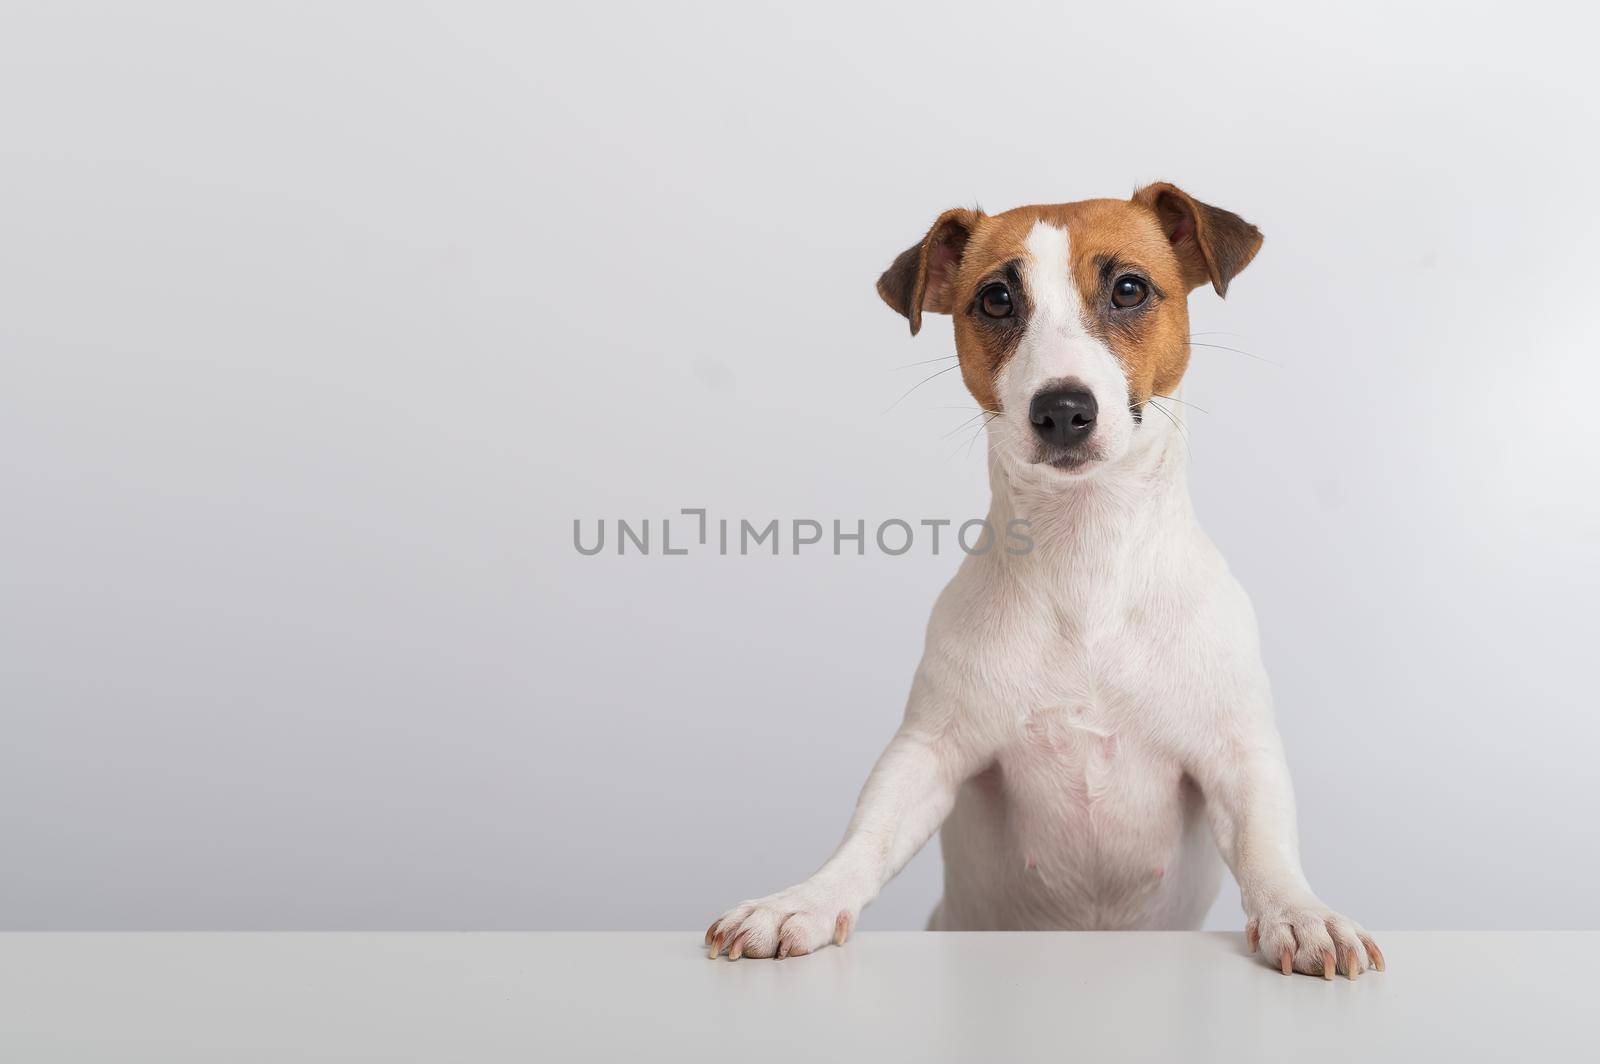 Gorgeous purebred Jack Russell Terrier dog peeking out from behind a banner on a white background. Copy space by mrwed54